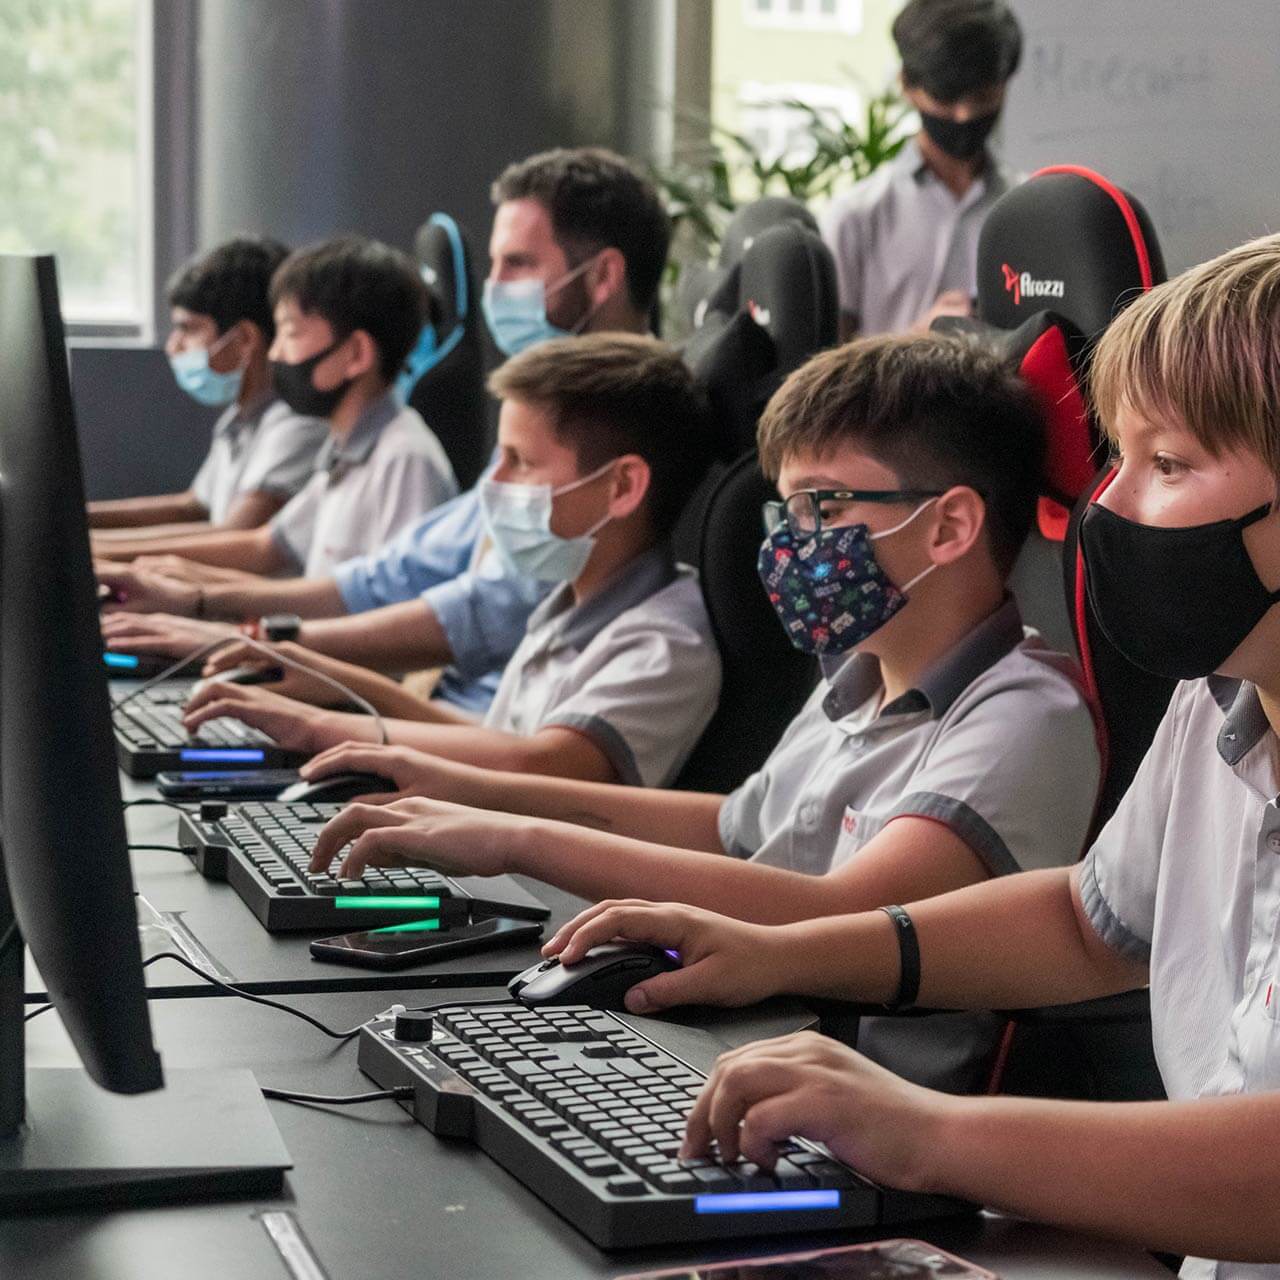 New eSports Programme - a first among international schools in Singapore